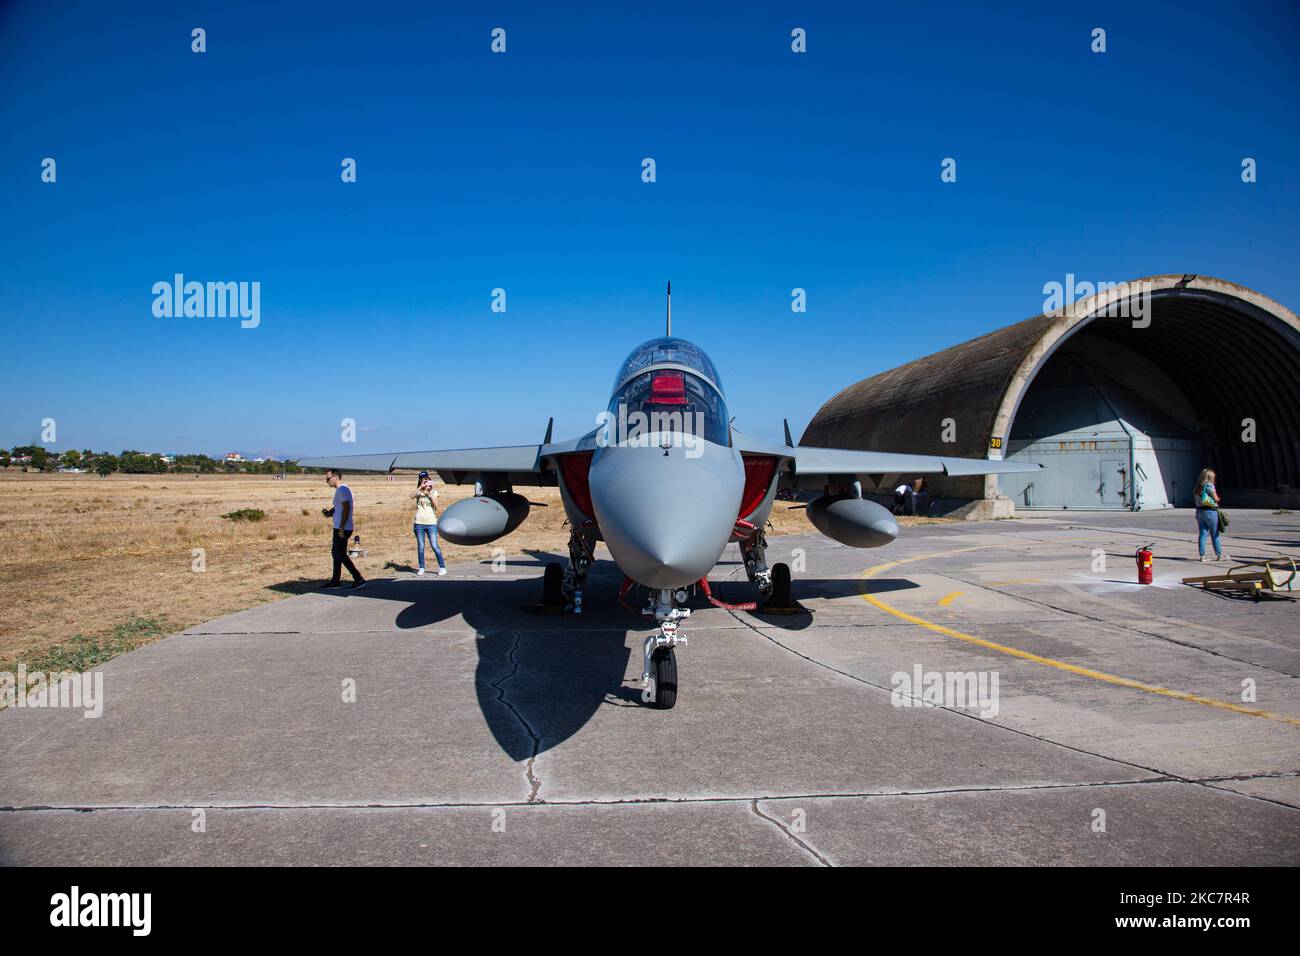 Alenia Aermacchi M-346 Master, a twin engine trainer jet aircraft and light attack of the Italian Air Force as seen on display parked at the tarmac in Tanagra LGTG Air Base near Athens During the Athens Flying Week 2019 Air show. The military jet is made in Italy by Alenia Aermacchi and Leonardo. The Hellenic Air Force HAF announced in January 2021 plans to acquire 10 of the Israeli M-346 Lavi variants for use as trainers in a new flight school. Tanagra Airport, Attika, Greece on September 2019 (Photo by Nicolas Economou/NurPhoto) Stock Photo